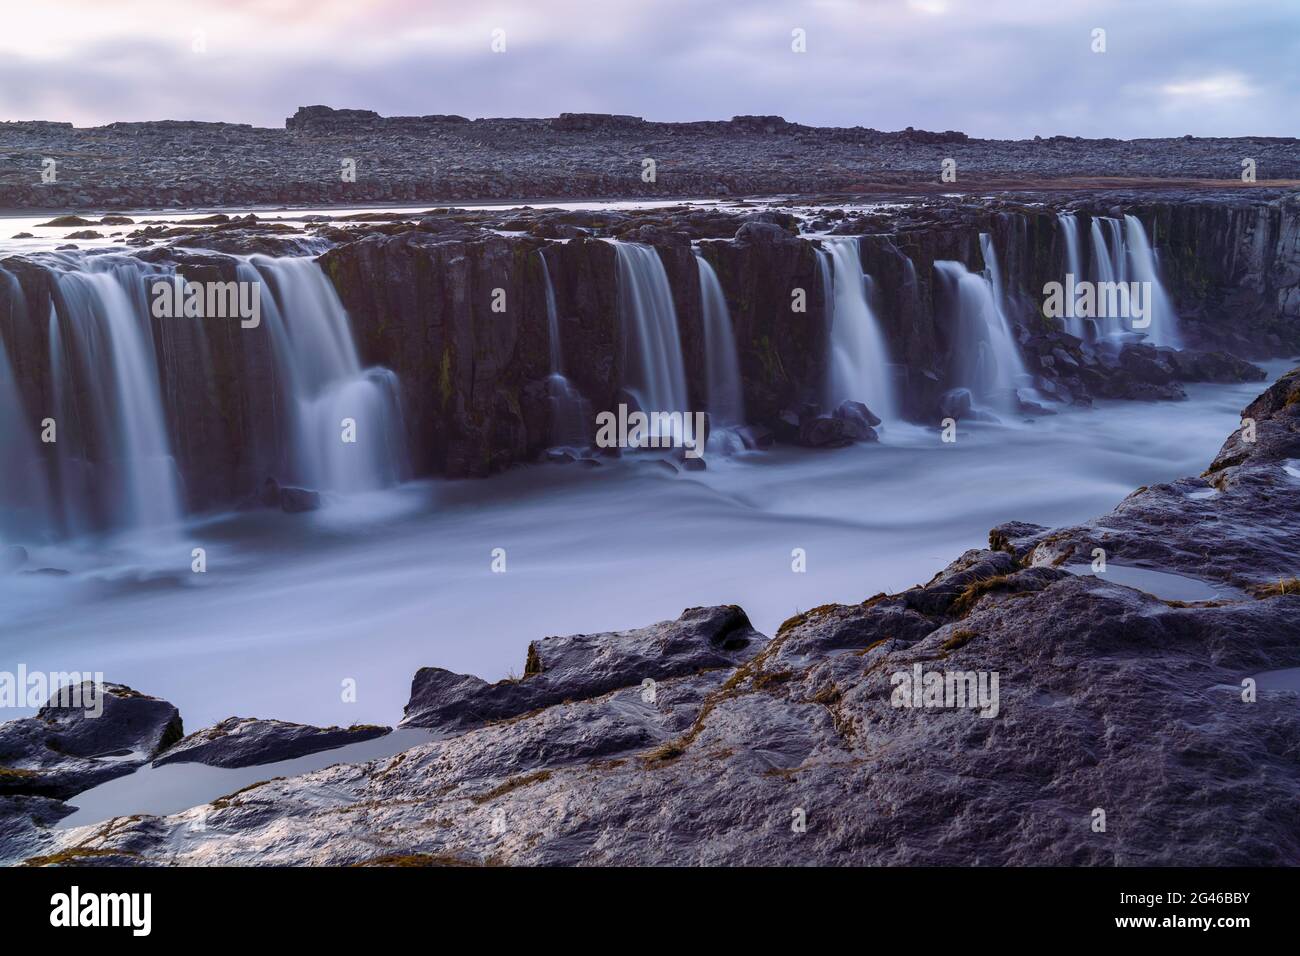 A magnificent view of the numerous streams of waterfalls flowing down to the river at the Dettifoss, Iceland Stock Photo